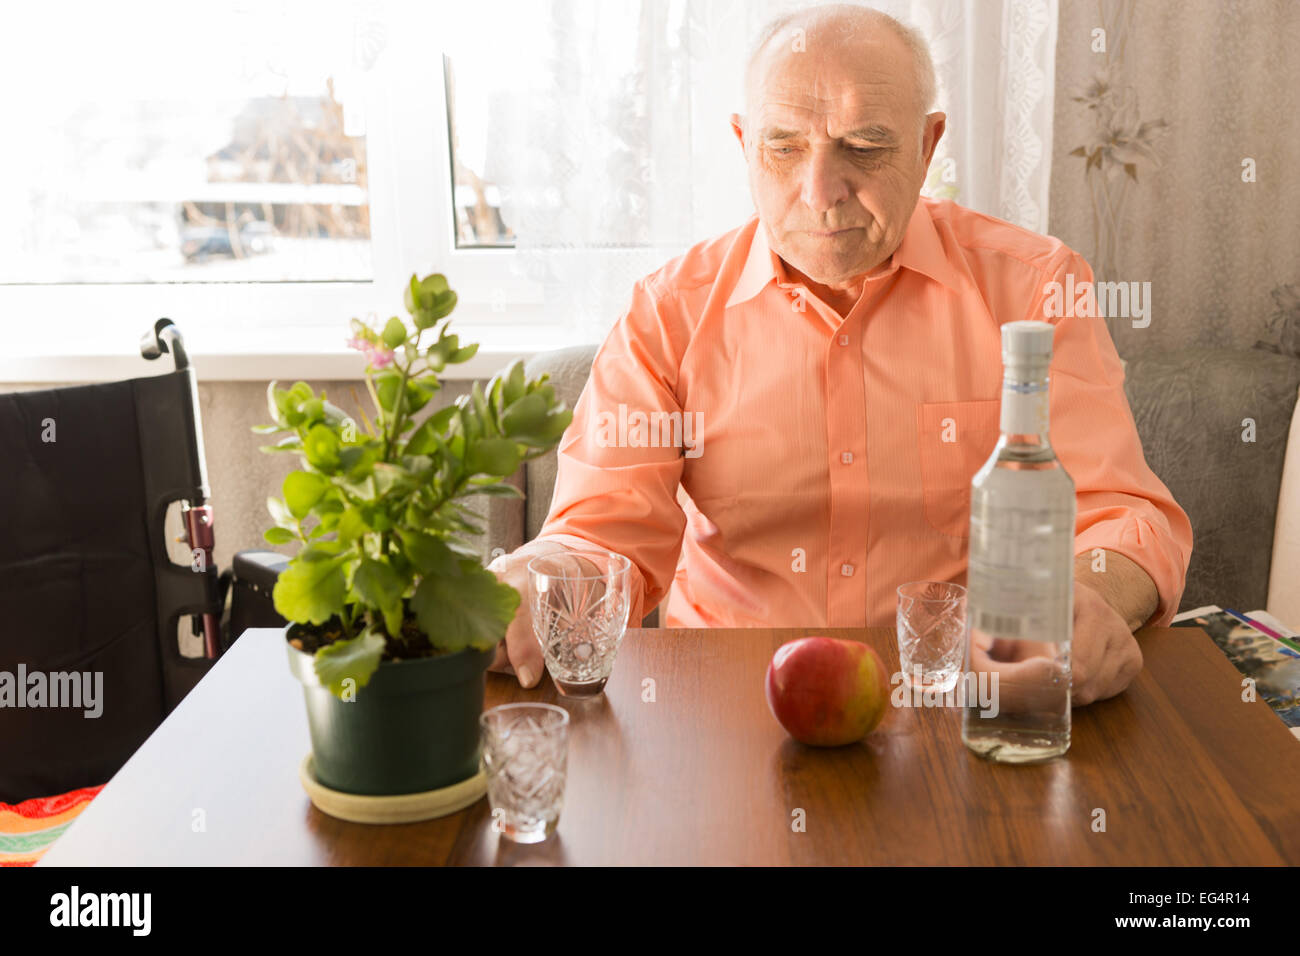 Close up Lonely Sitting Elderly Drinking Wine at the Table with Apple and Green Plant on Top. Stock Photo